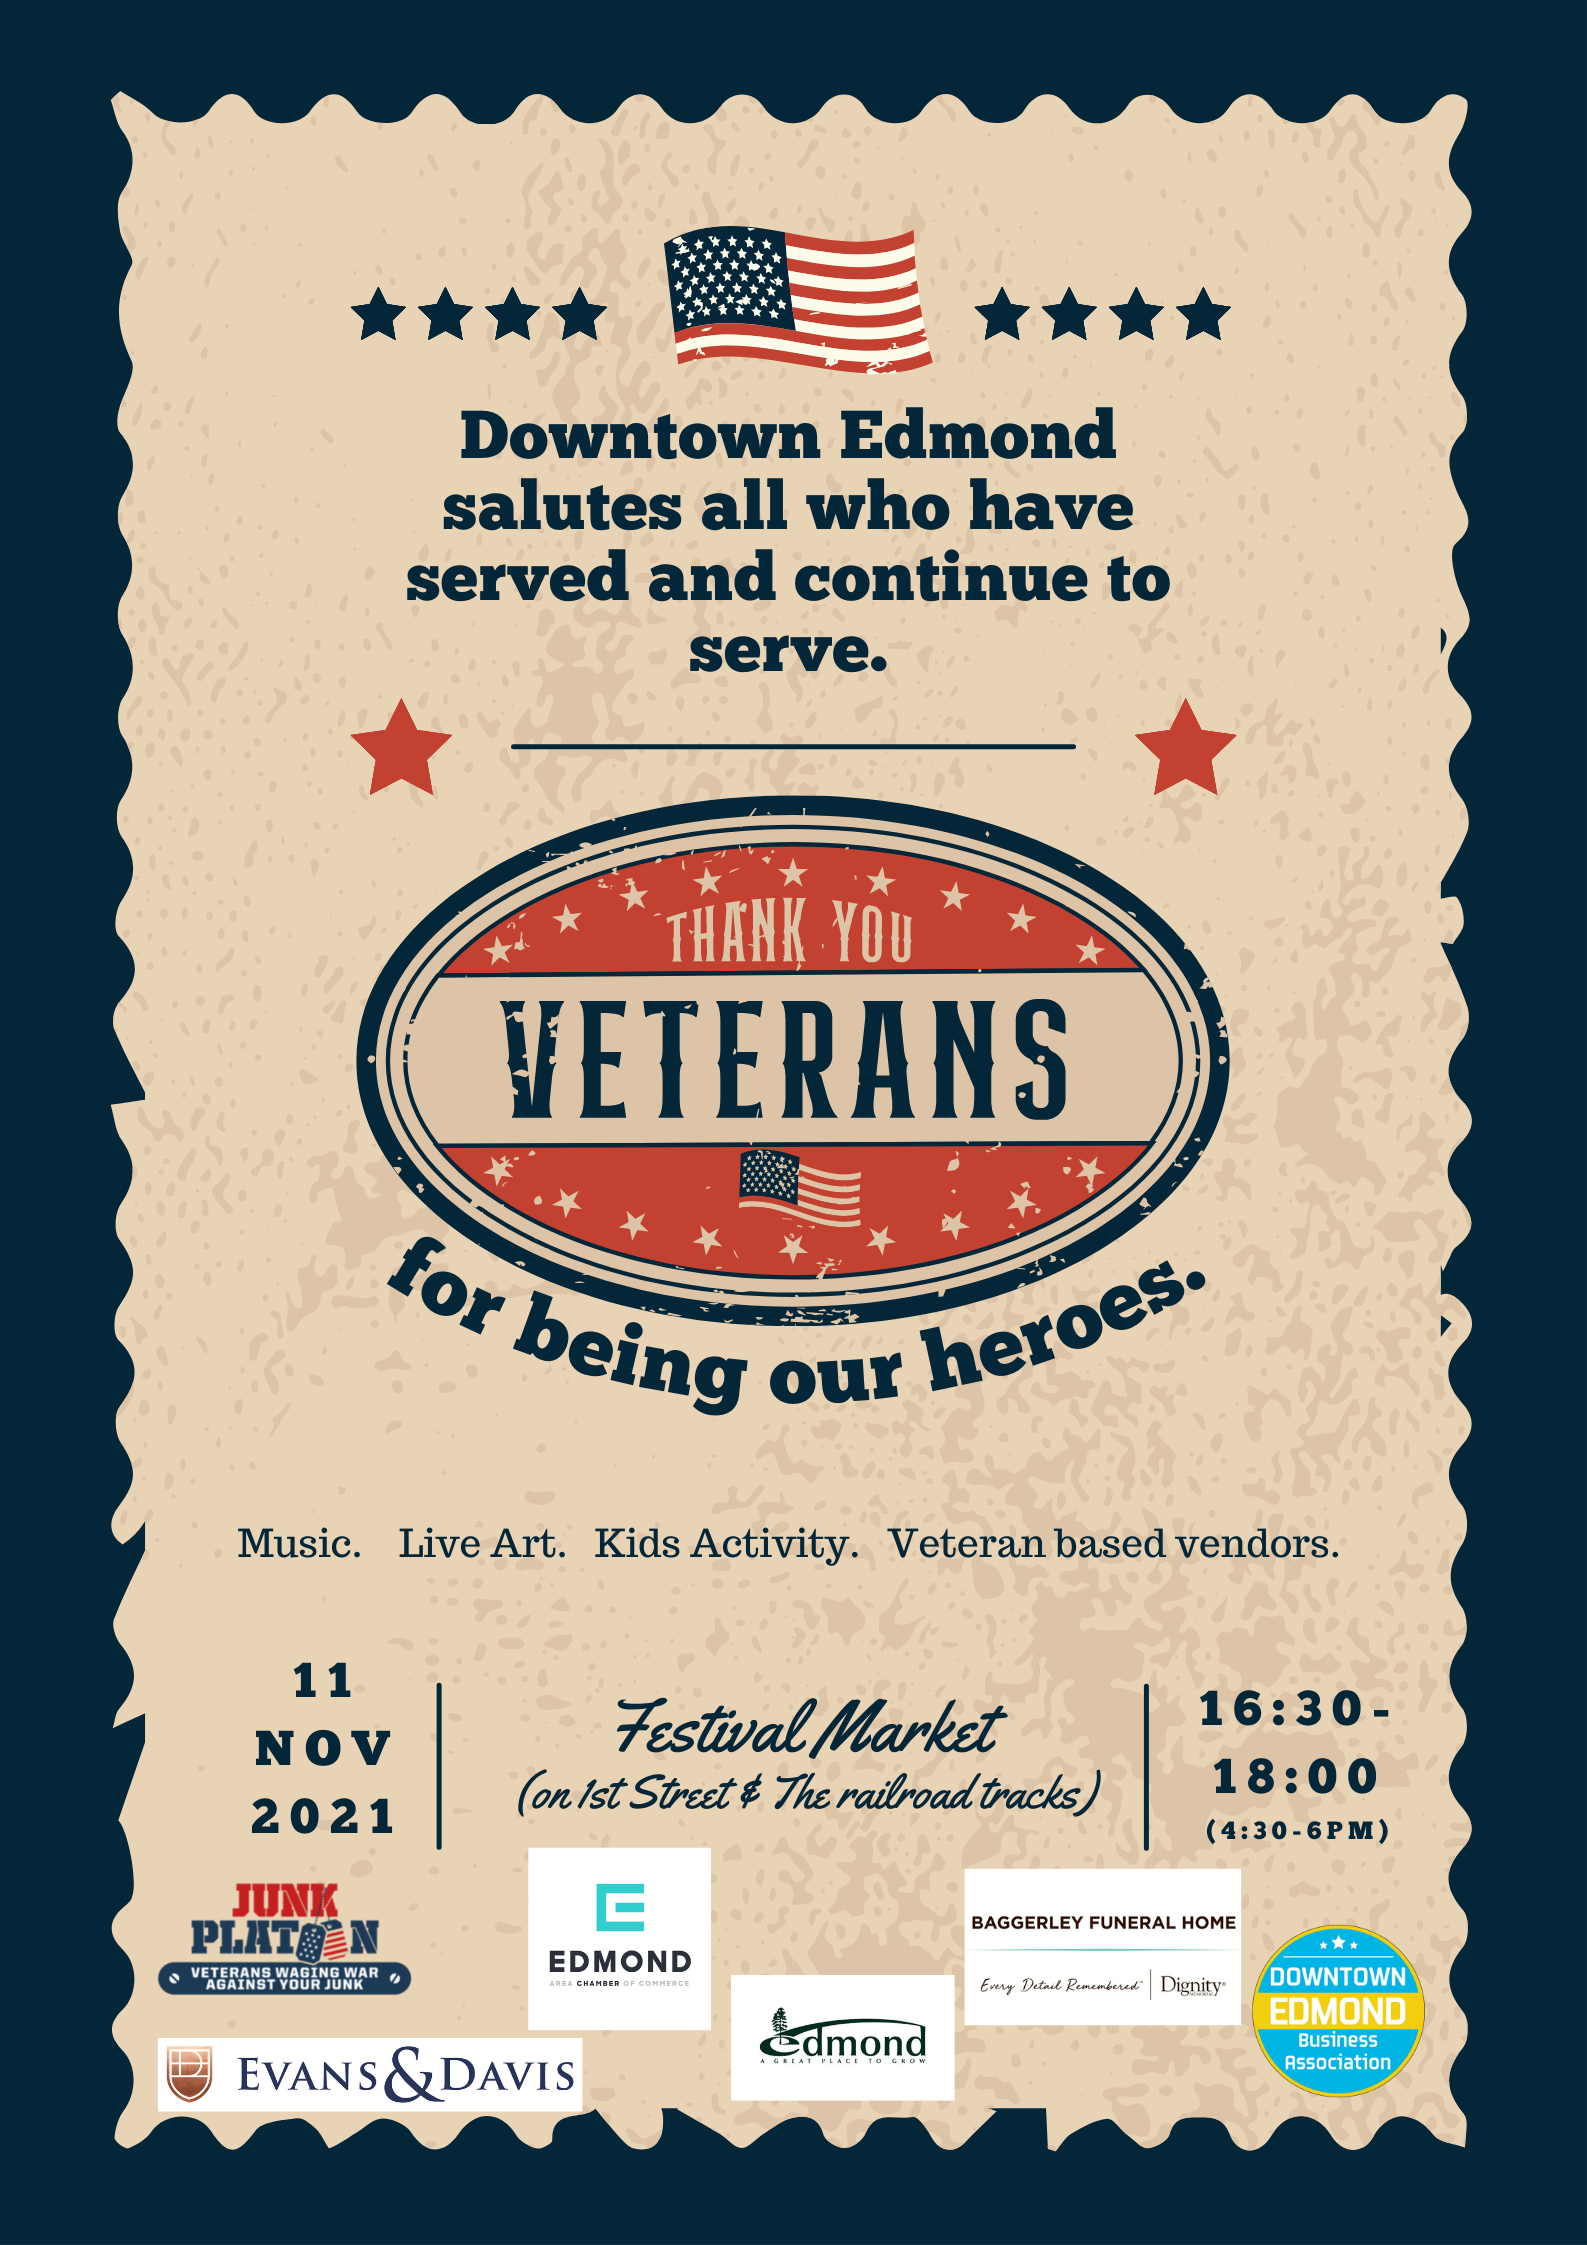 Downtown Edmond salutes all who serve and continue to serve. Thank you veterans for being our heroes.